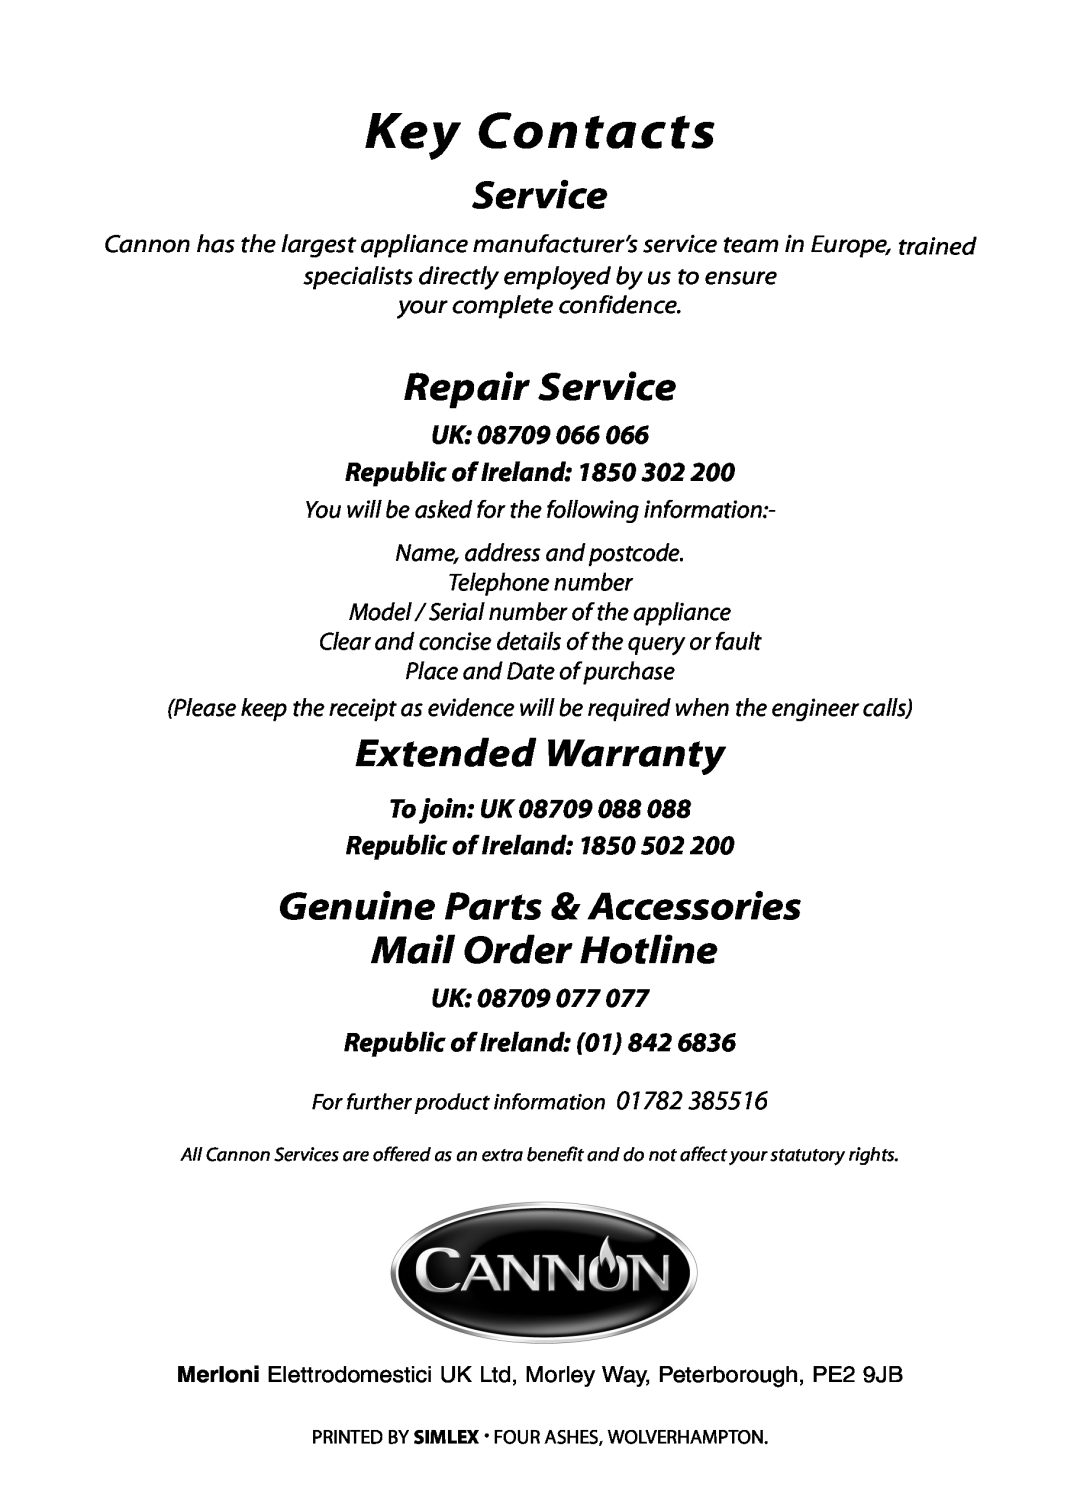 Cannon ICON 600 Key Contacts, Repair Service, Extended Warranty, Genuine Parts & Accessories Mail Order Hotline 